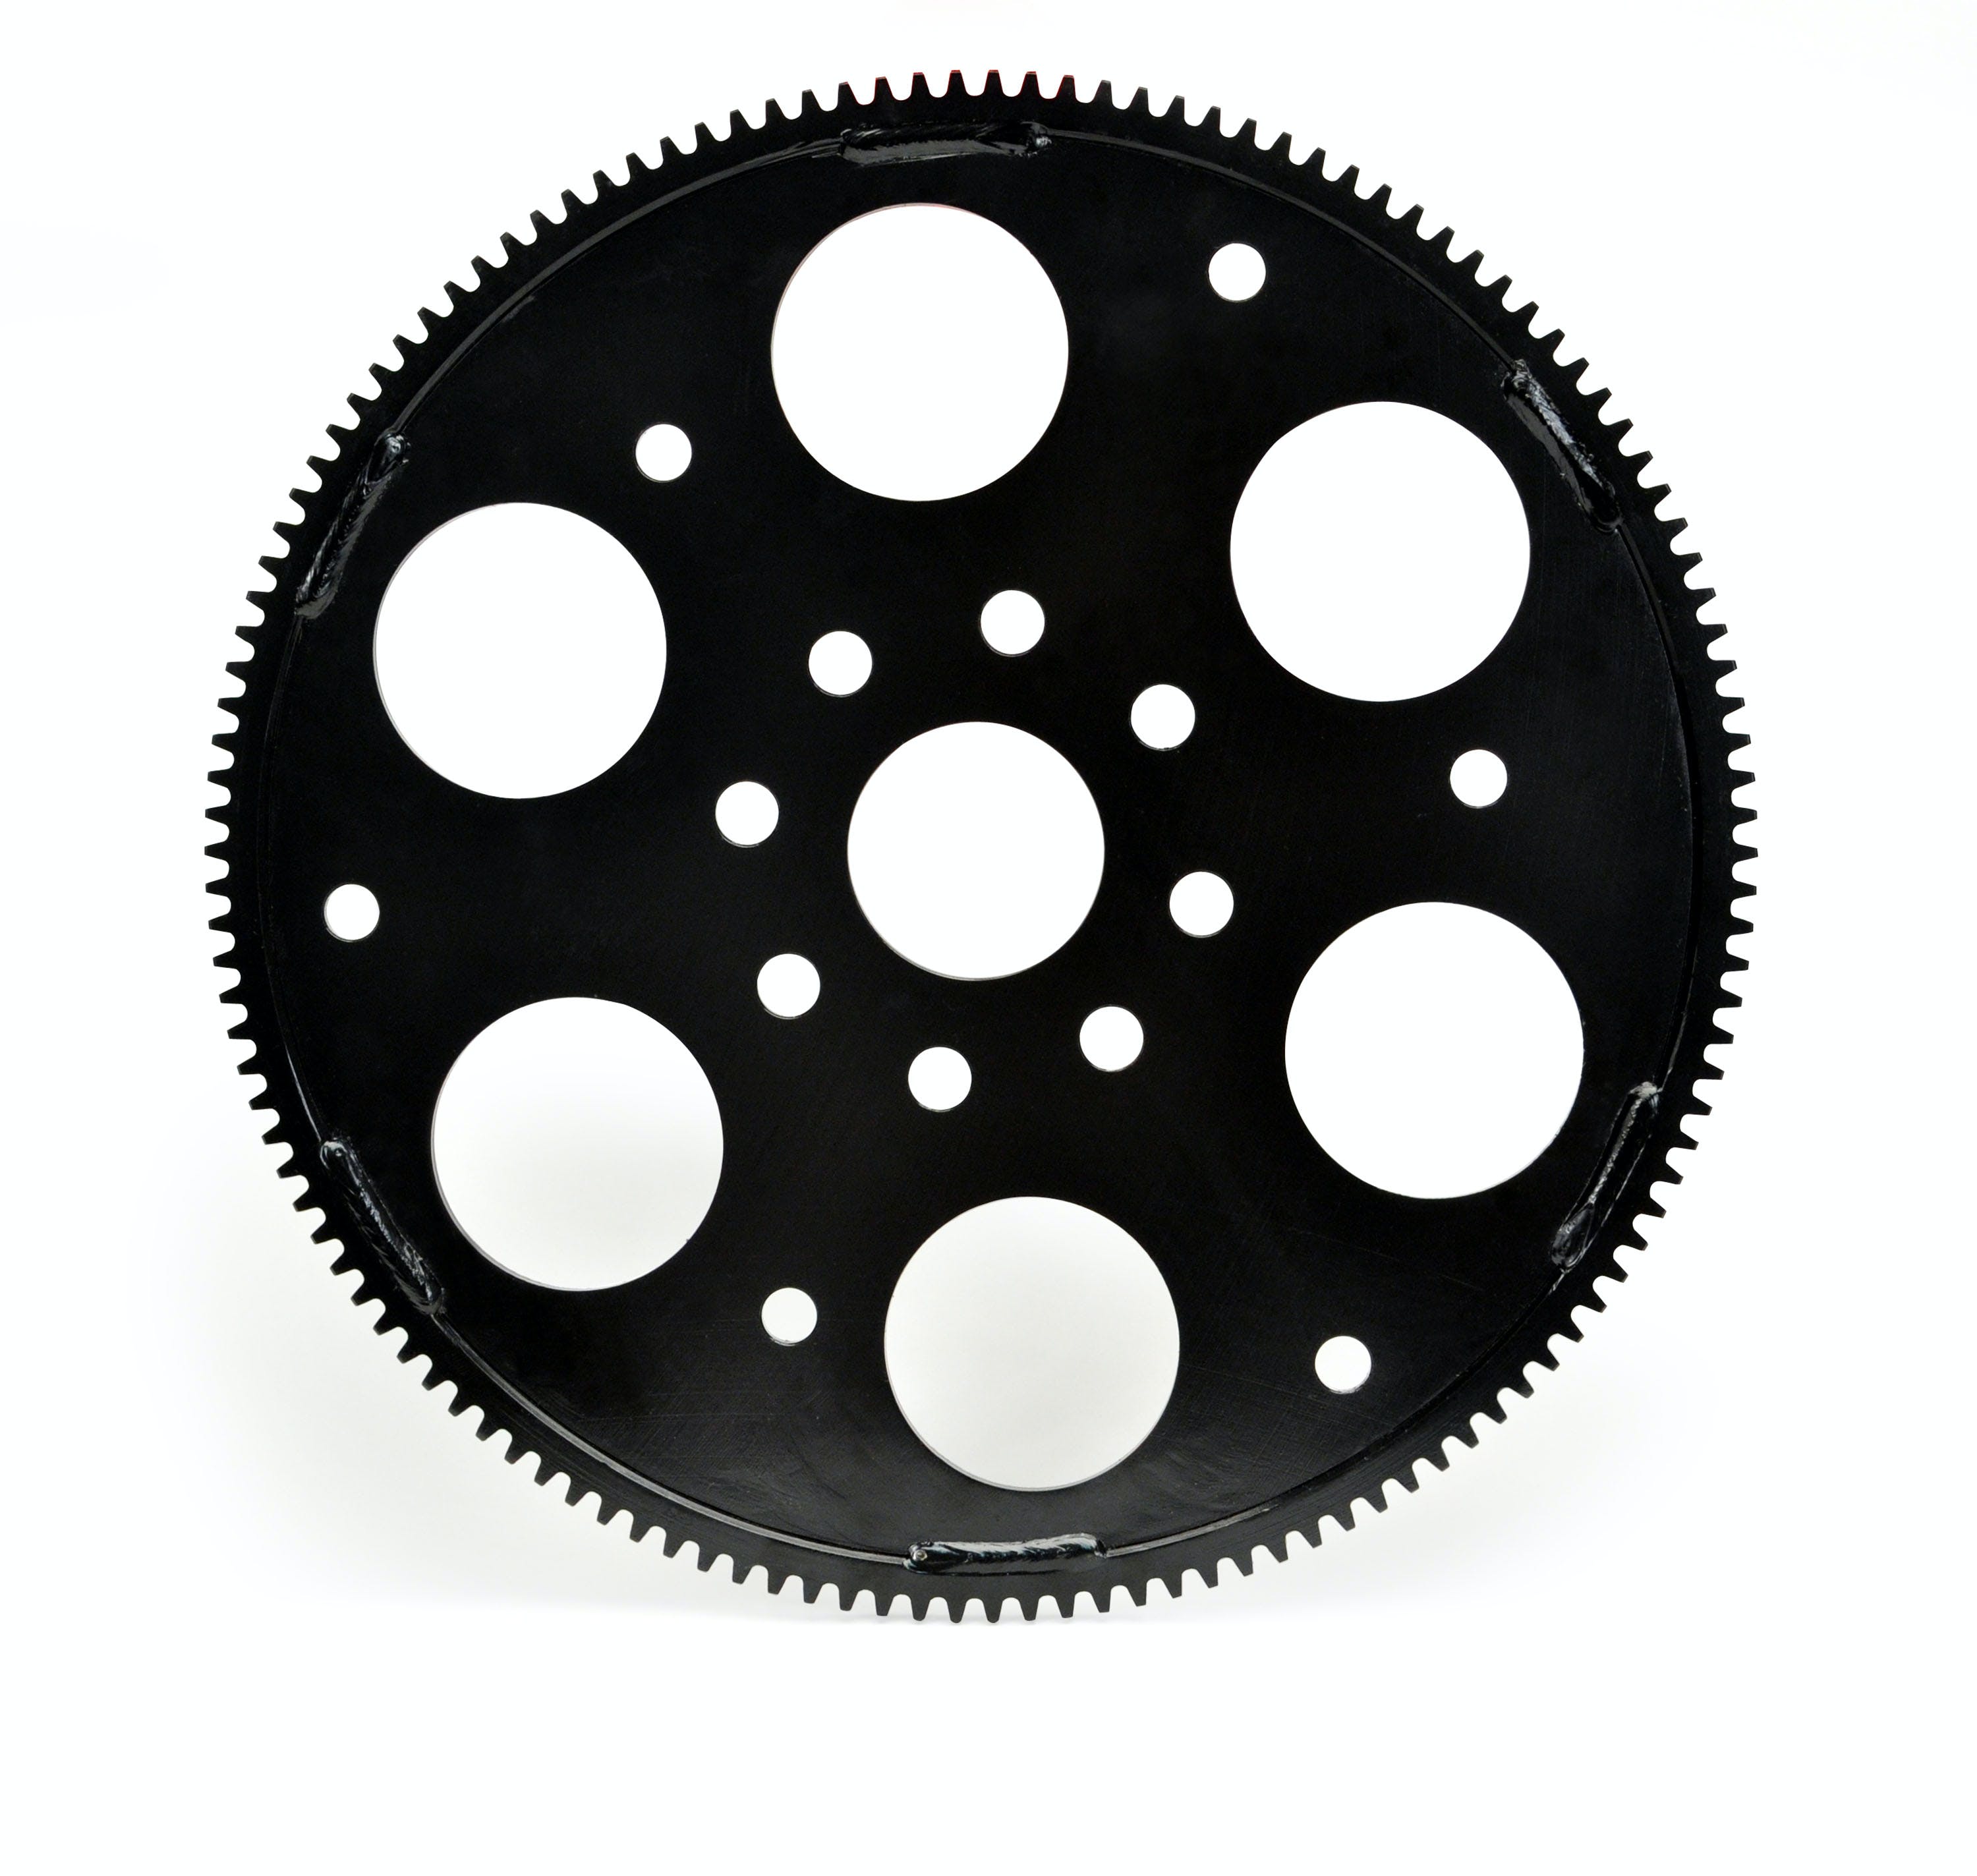 TCI Automotive 149182 Flexplate for Mopar engines and GM Trans Small GM Pattern 8-Hole Crank